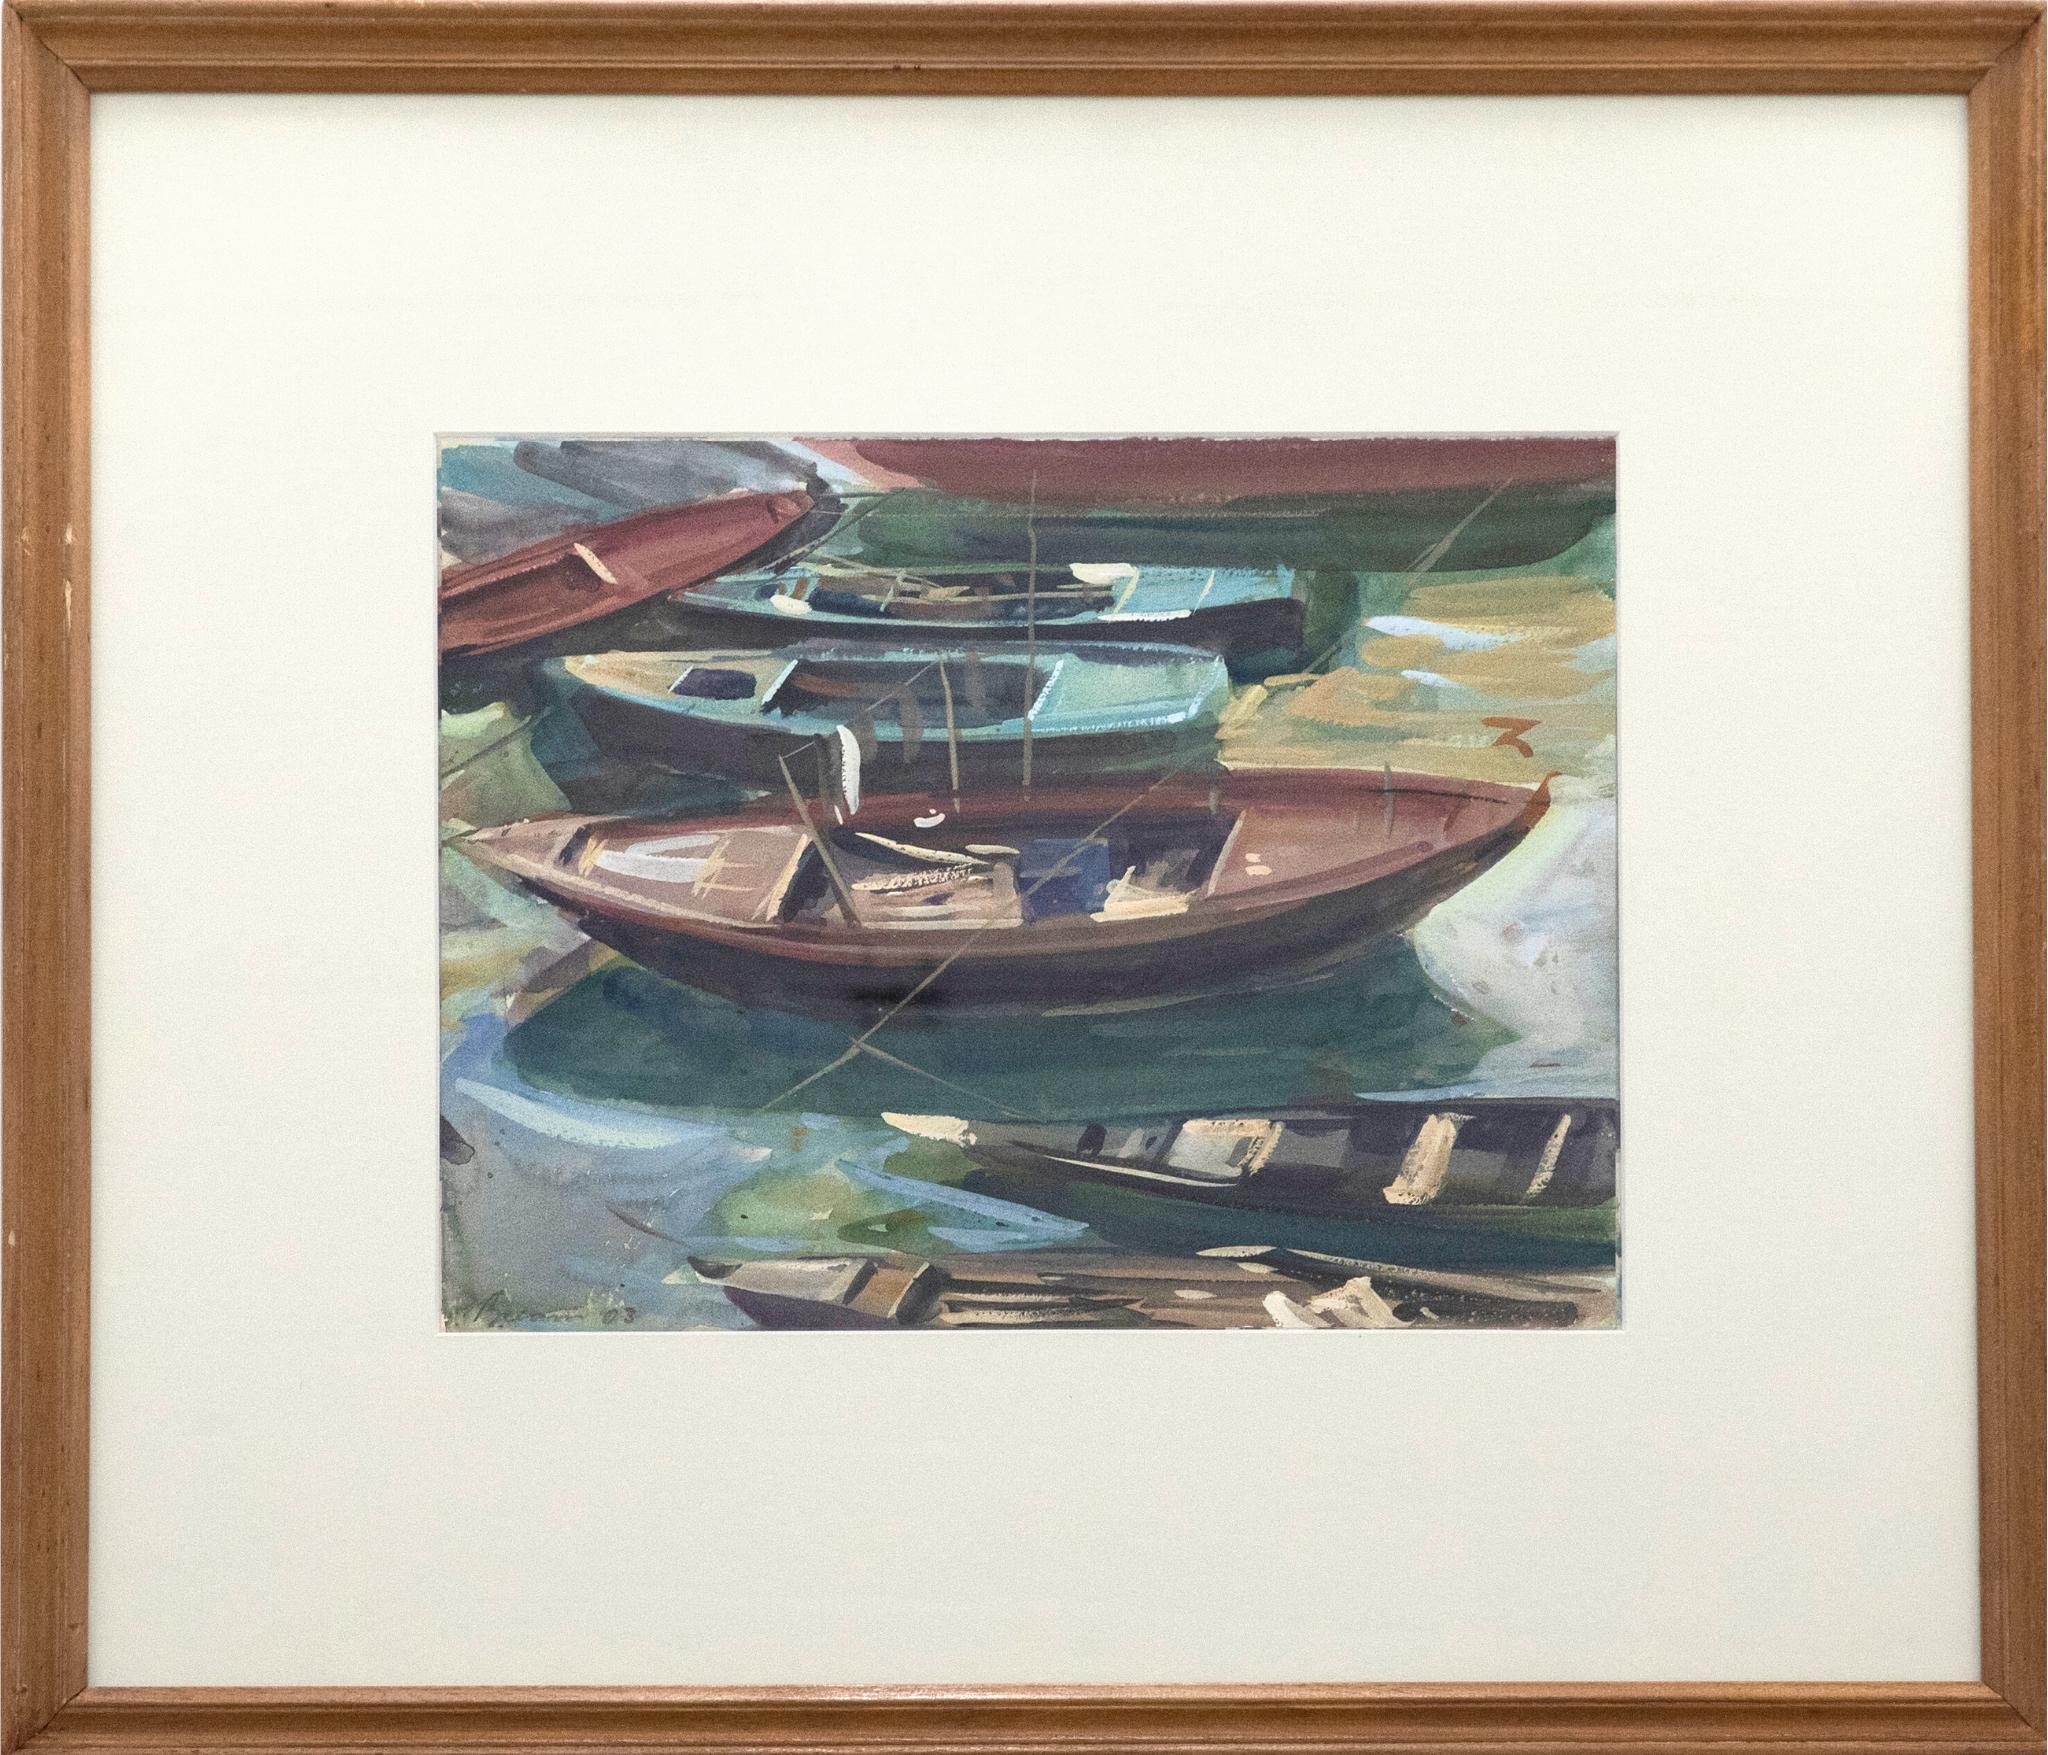 An expressive study of sailing boats and canoes by contemporary artist Anthony Bream (b.1943). Heightened with fleeting strokes of gouache colour. Presented in a new card mount and natural wood frame. Signed & dated. On watercolour paper.